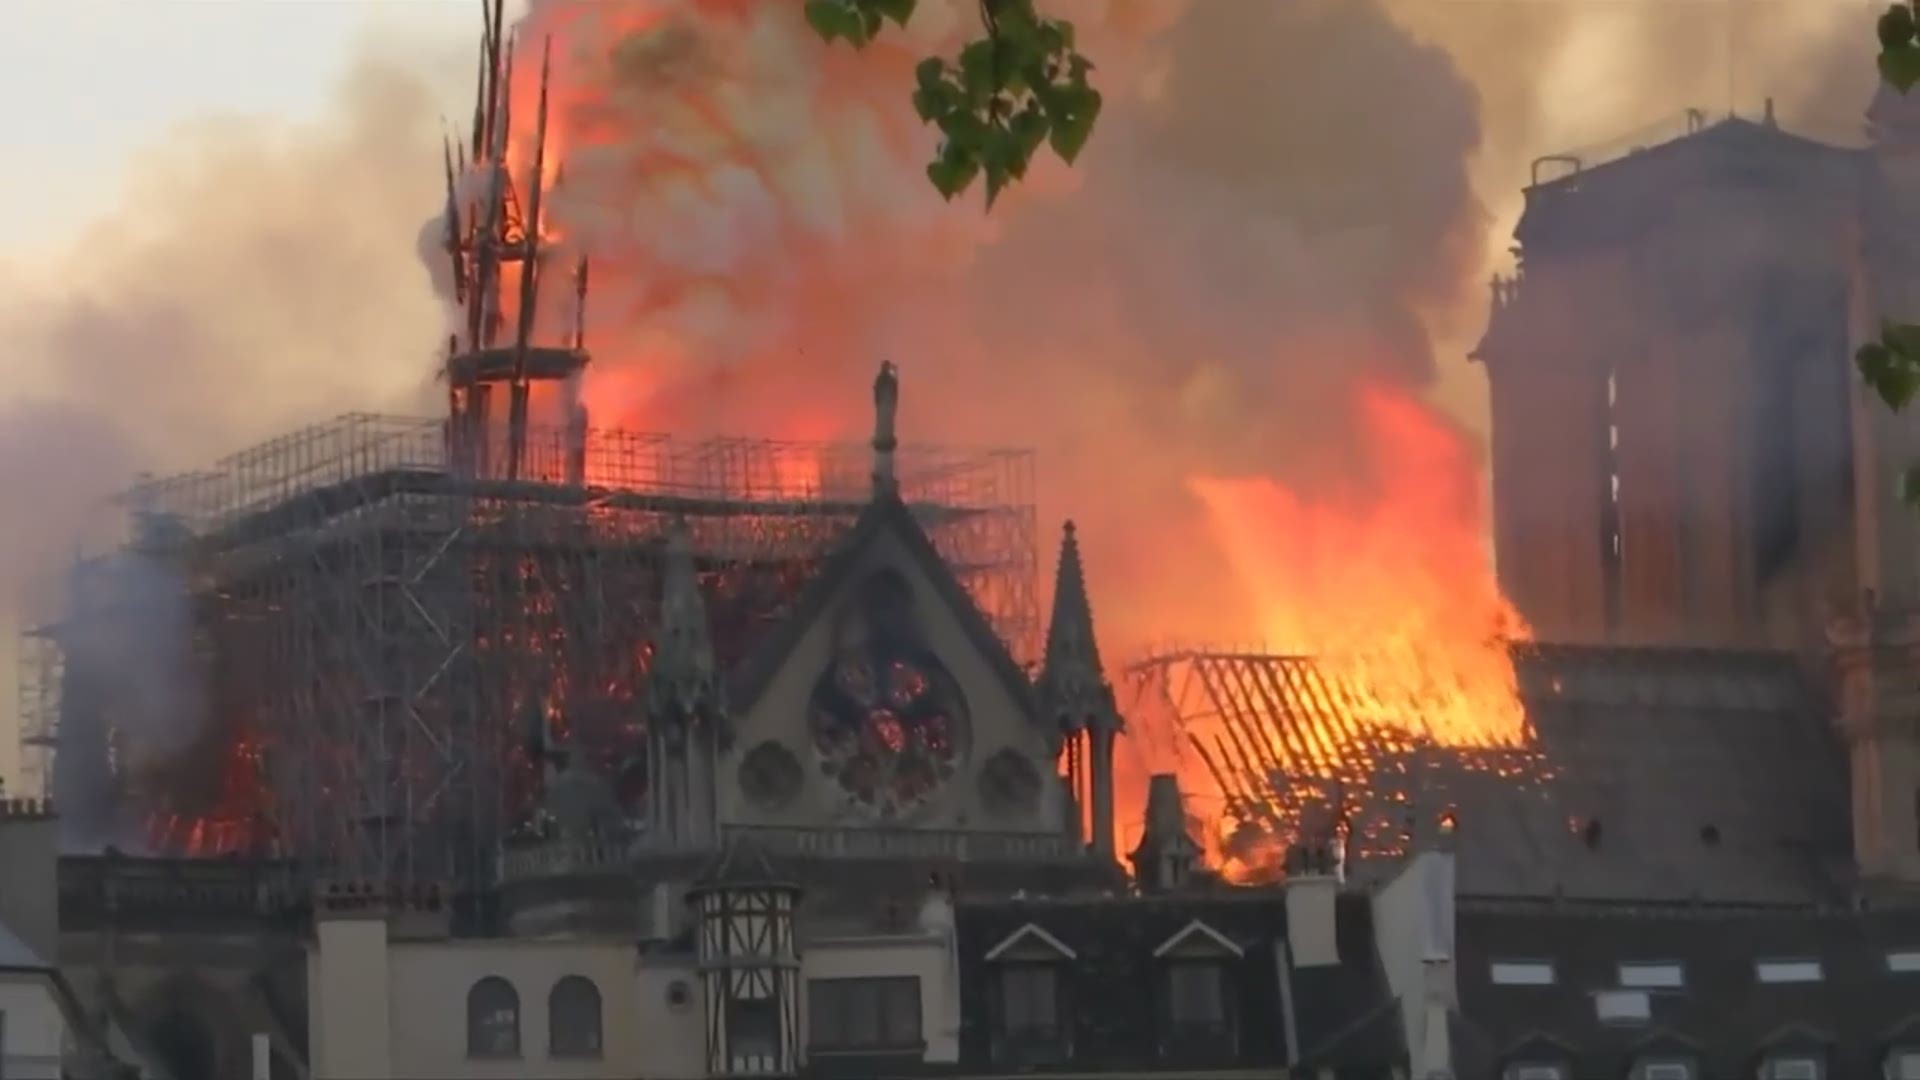 Notre Dame's spire was undergoing renovations when the fire started and quickly spread to one of the church's rectangular towers.